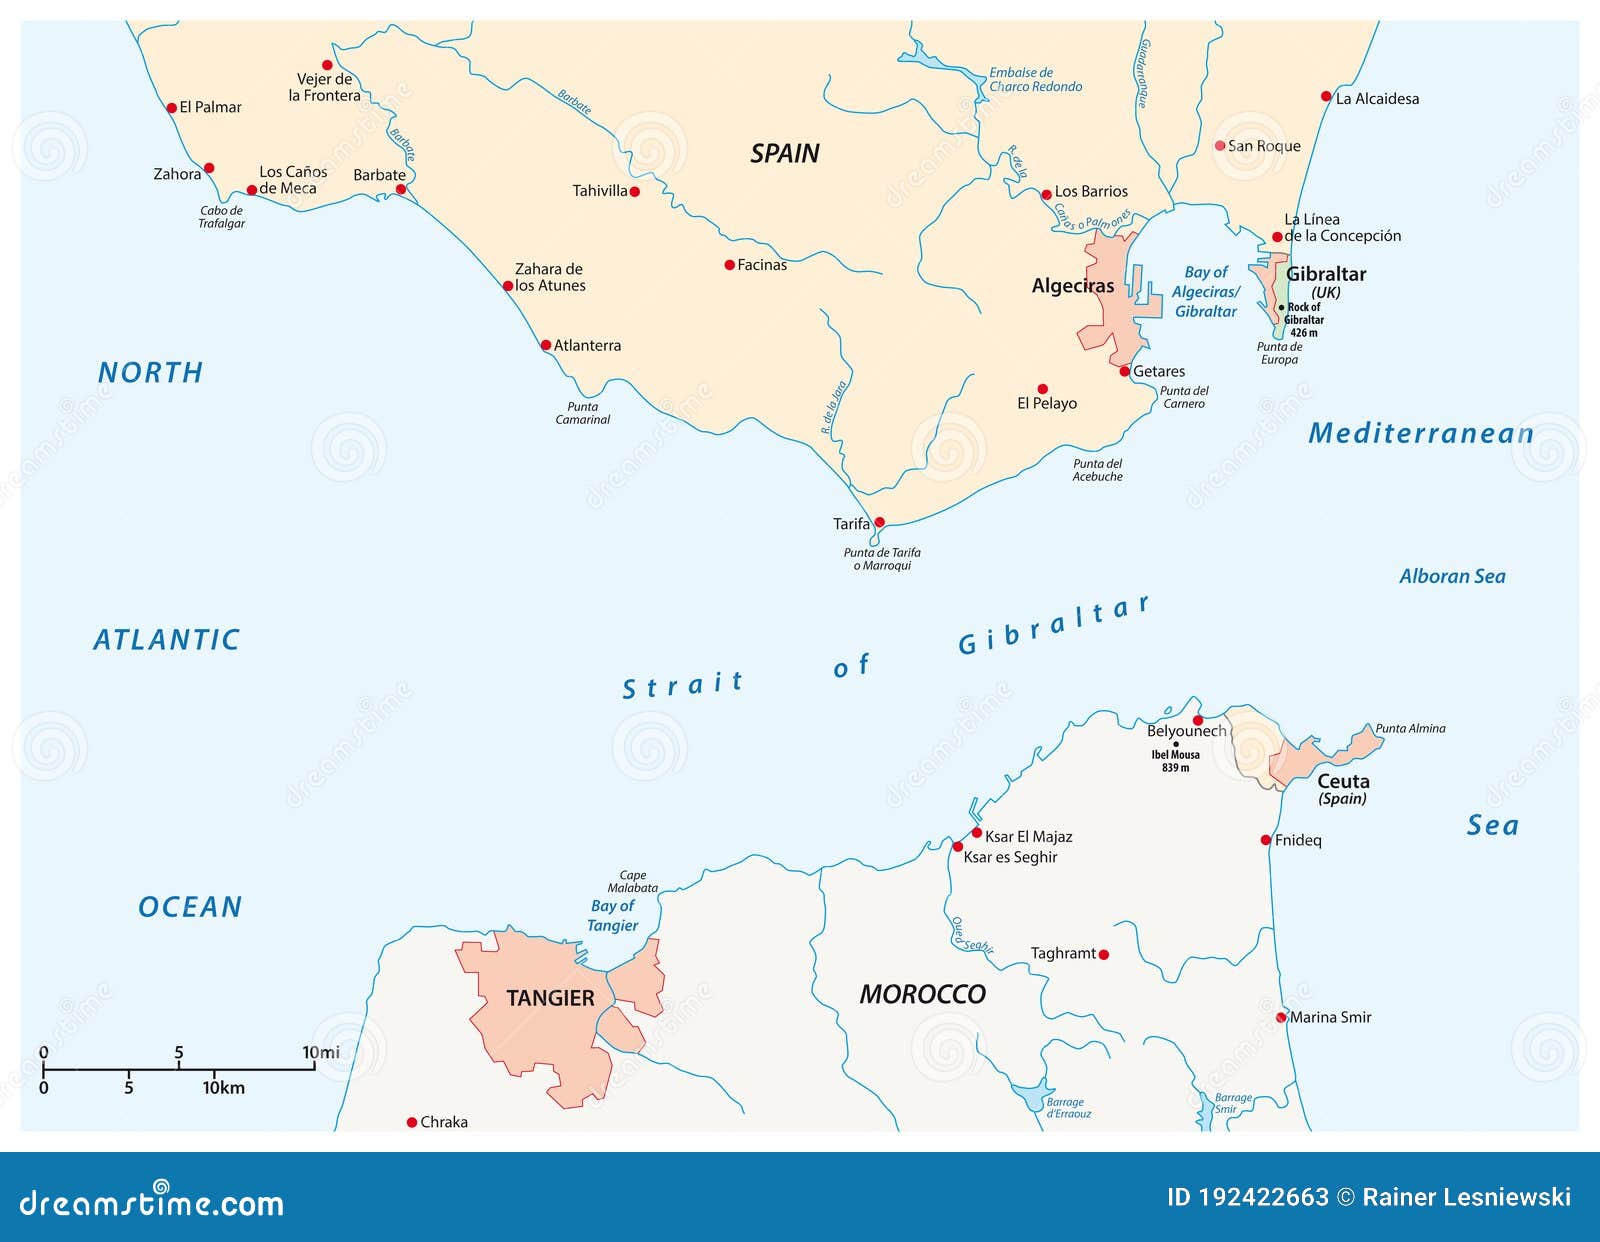 strait of gibraltar, waterway between spain and morocco  map